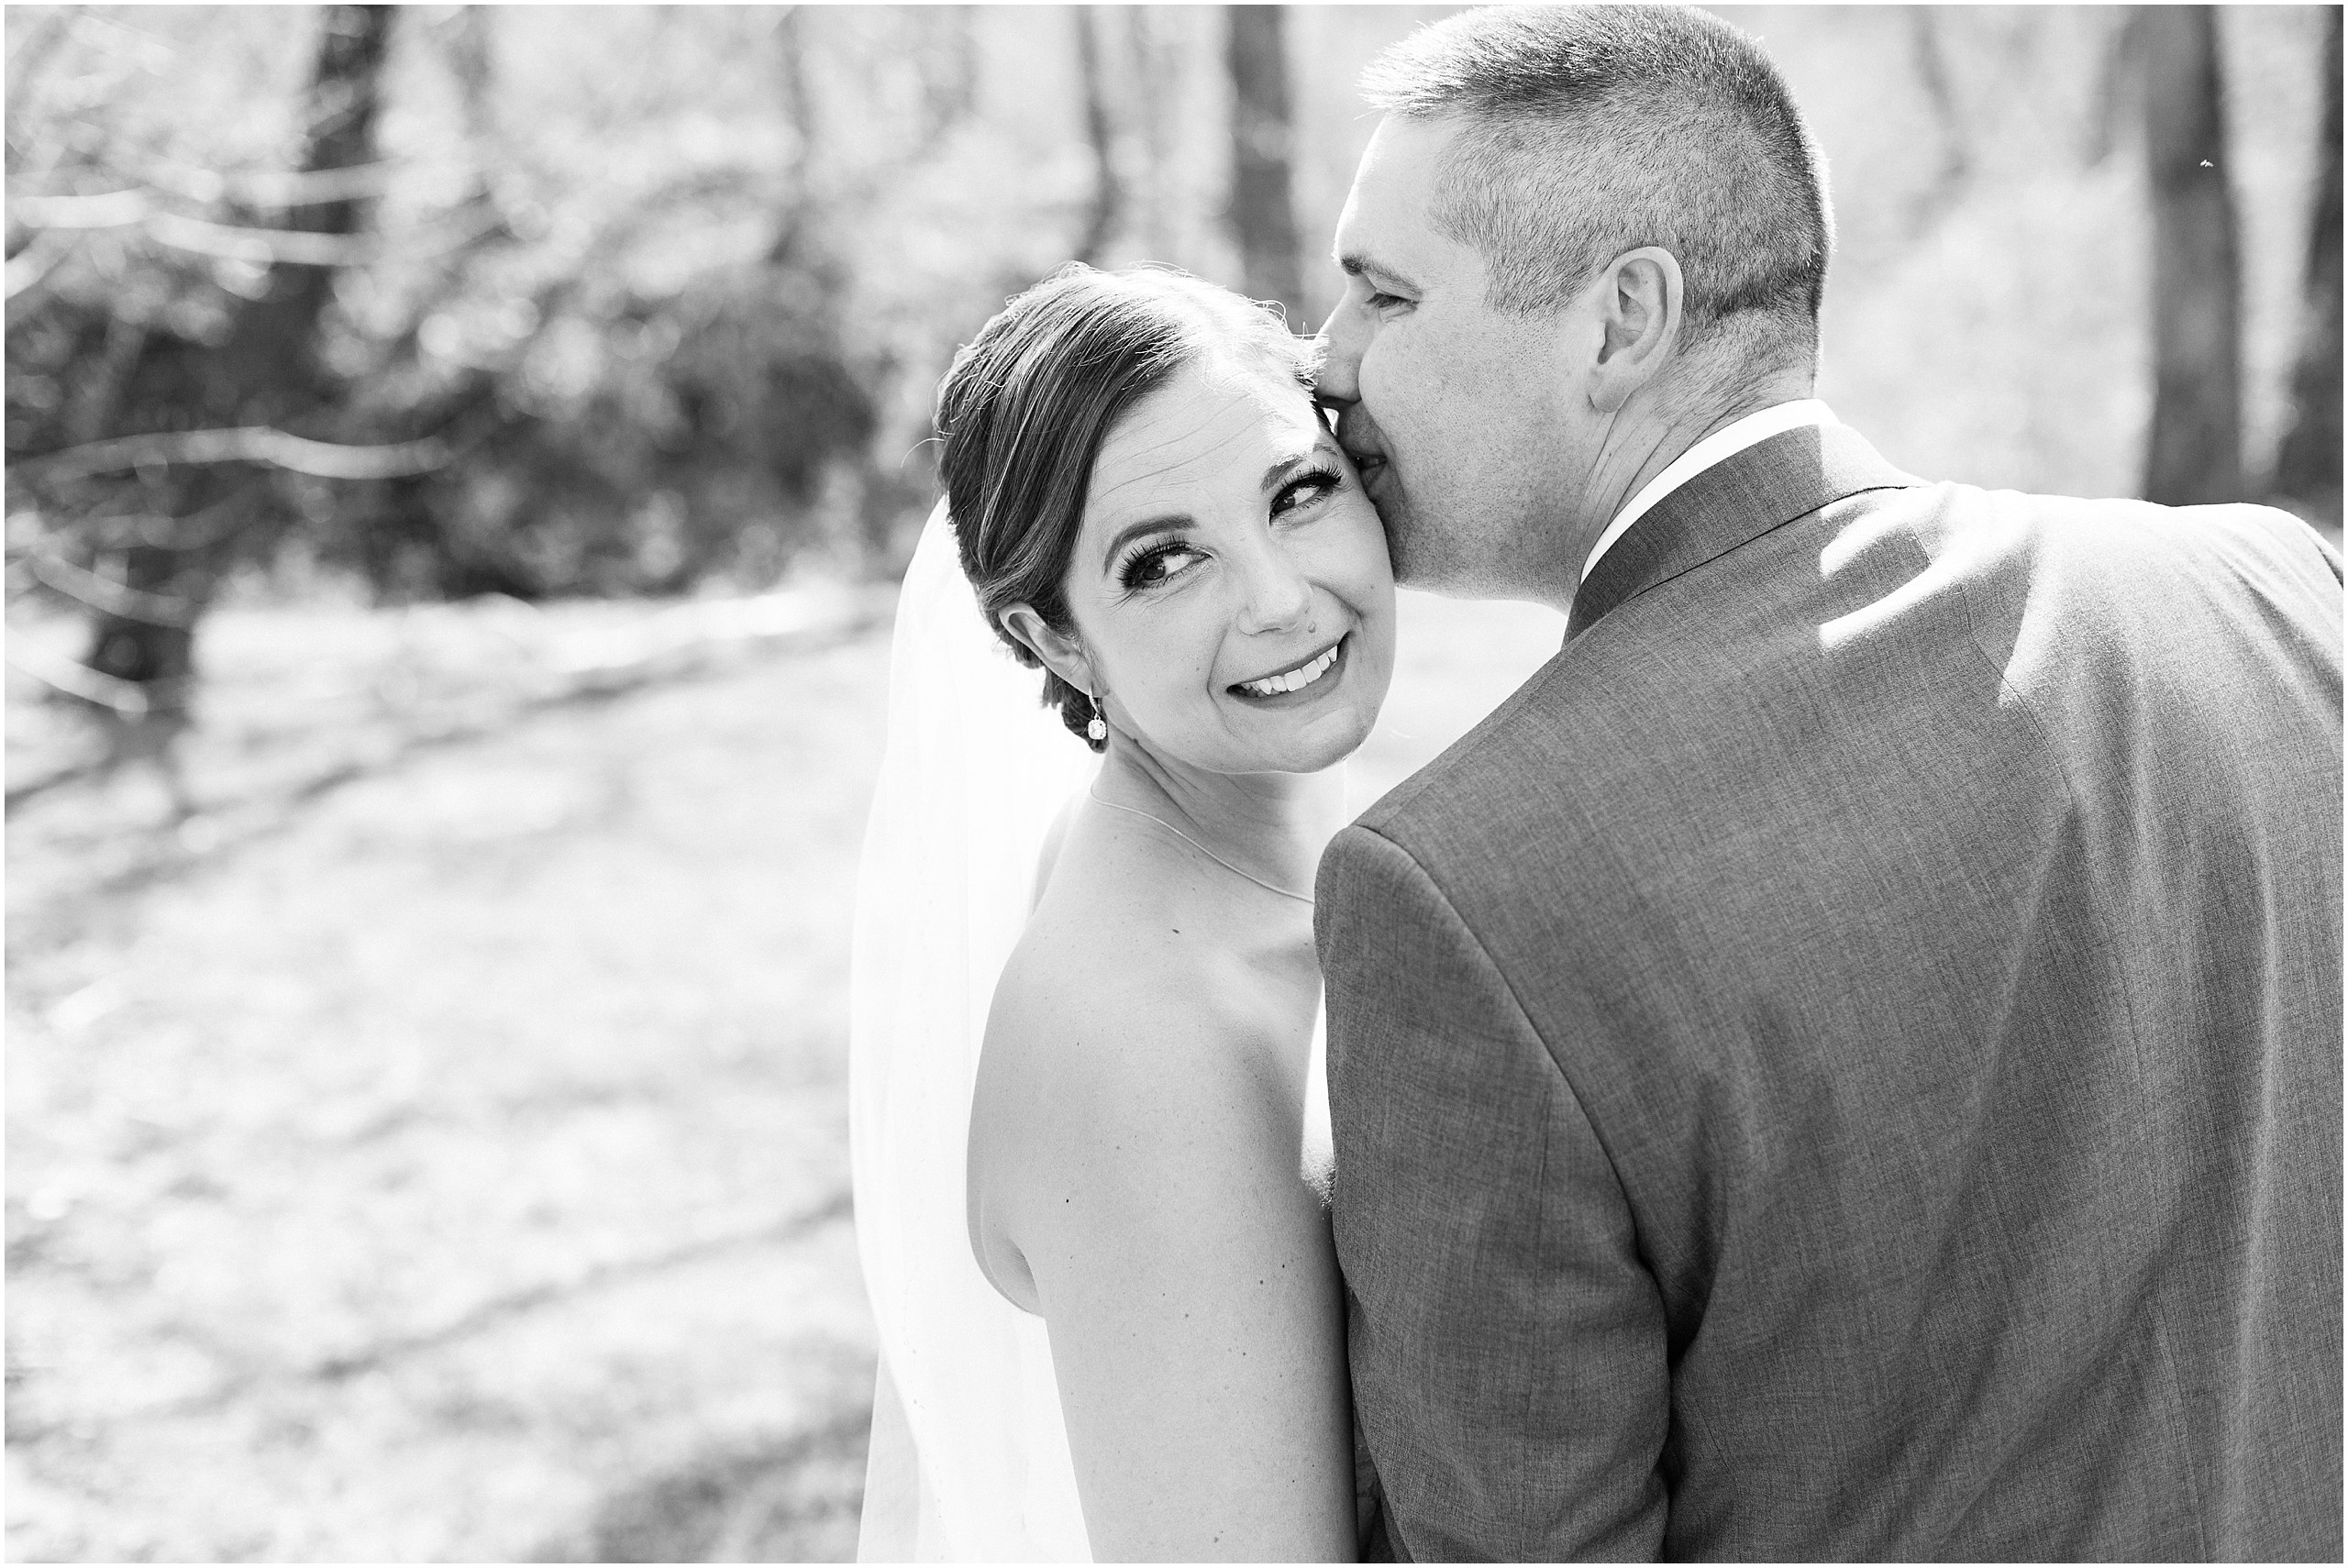 Andy & Stacy's Grey Lavender Wedding at The Barn on Bridge in Collegeville, PA